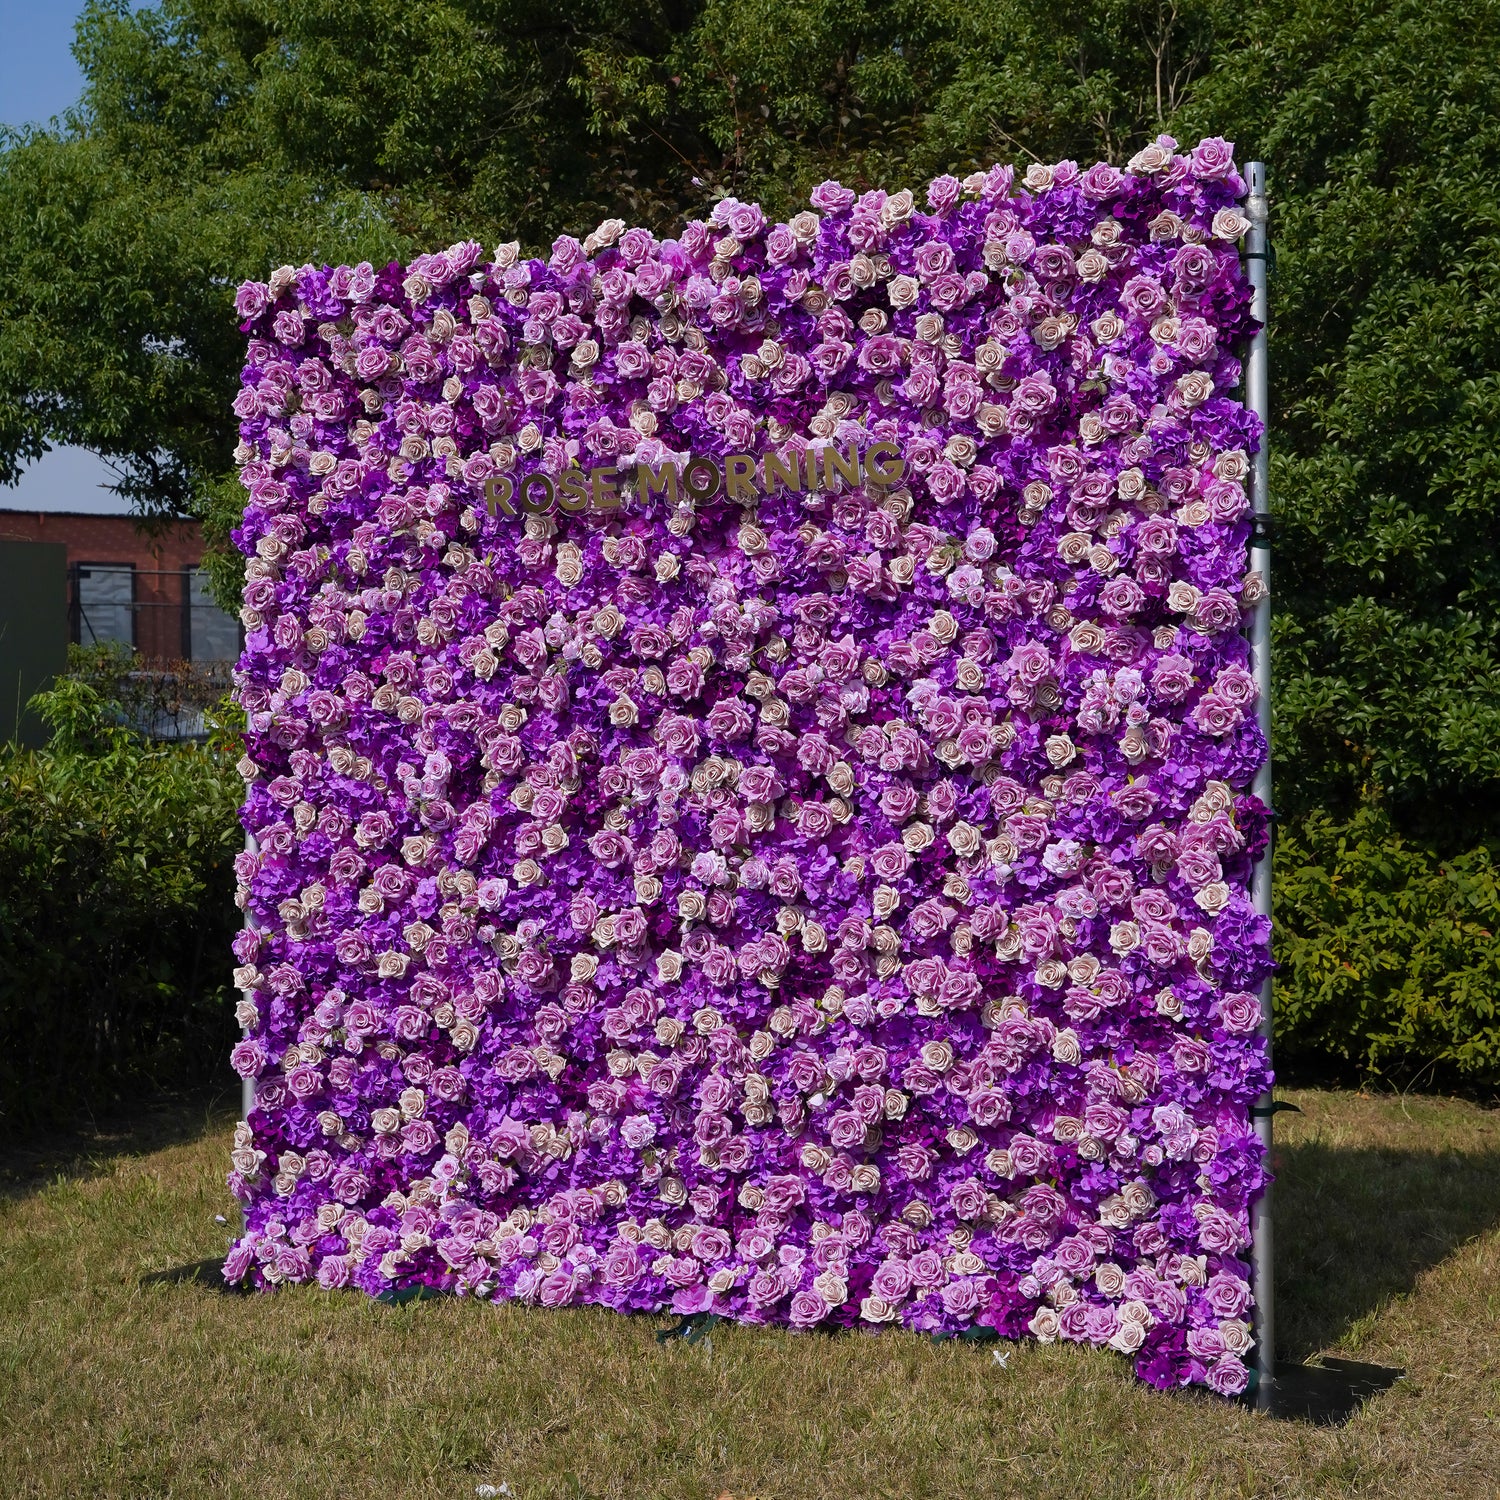 Sofia: 3D Fabric Artificial Flower Wall Rolling Up Curtain Flower Wall R199 - 8ft*8ft Rose Morning